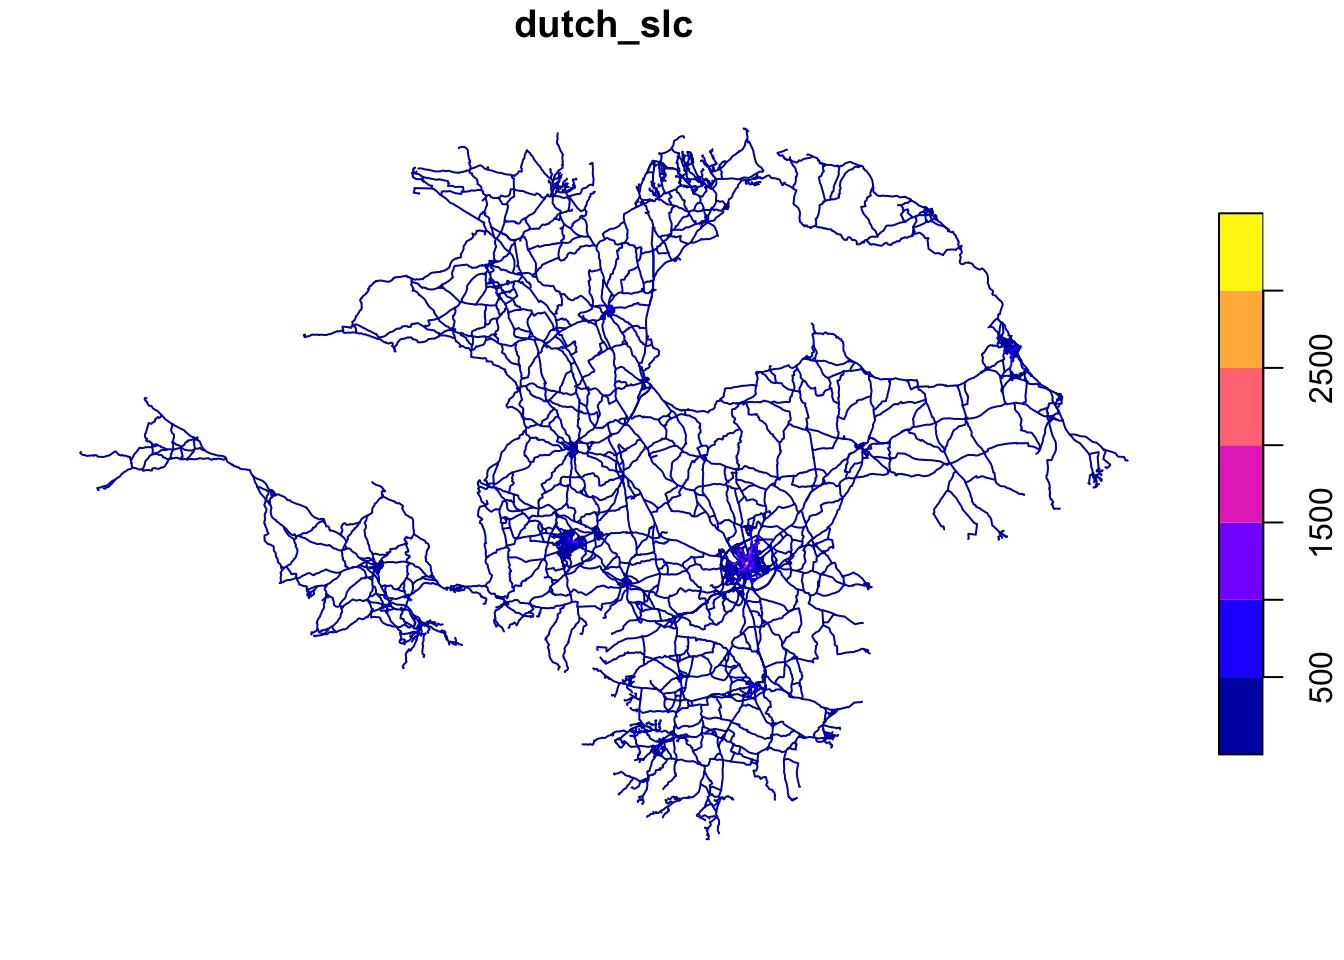 Illustration of route network based on car trips that could be replaced by bicycle trips, based on Census data on car trips to work and the Go Dutch uptake function used in the PCT.